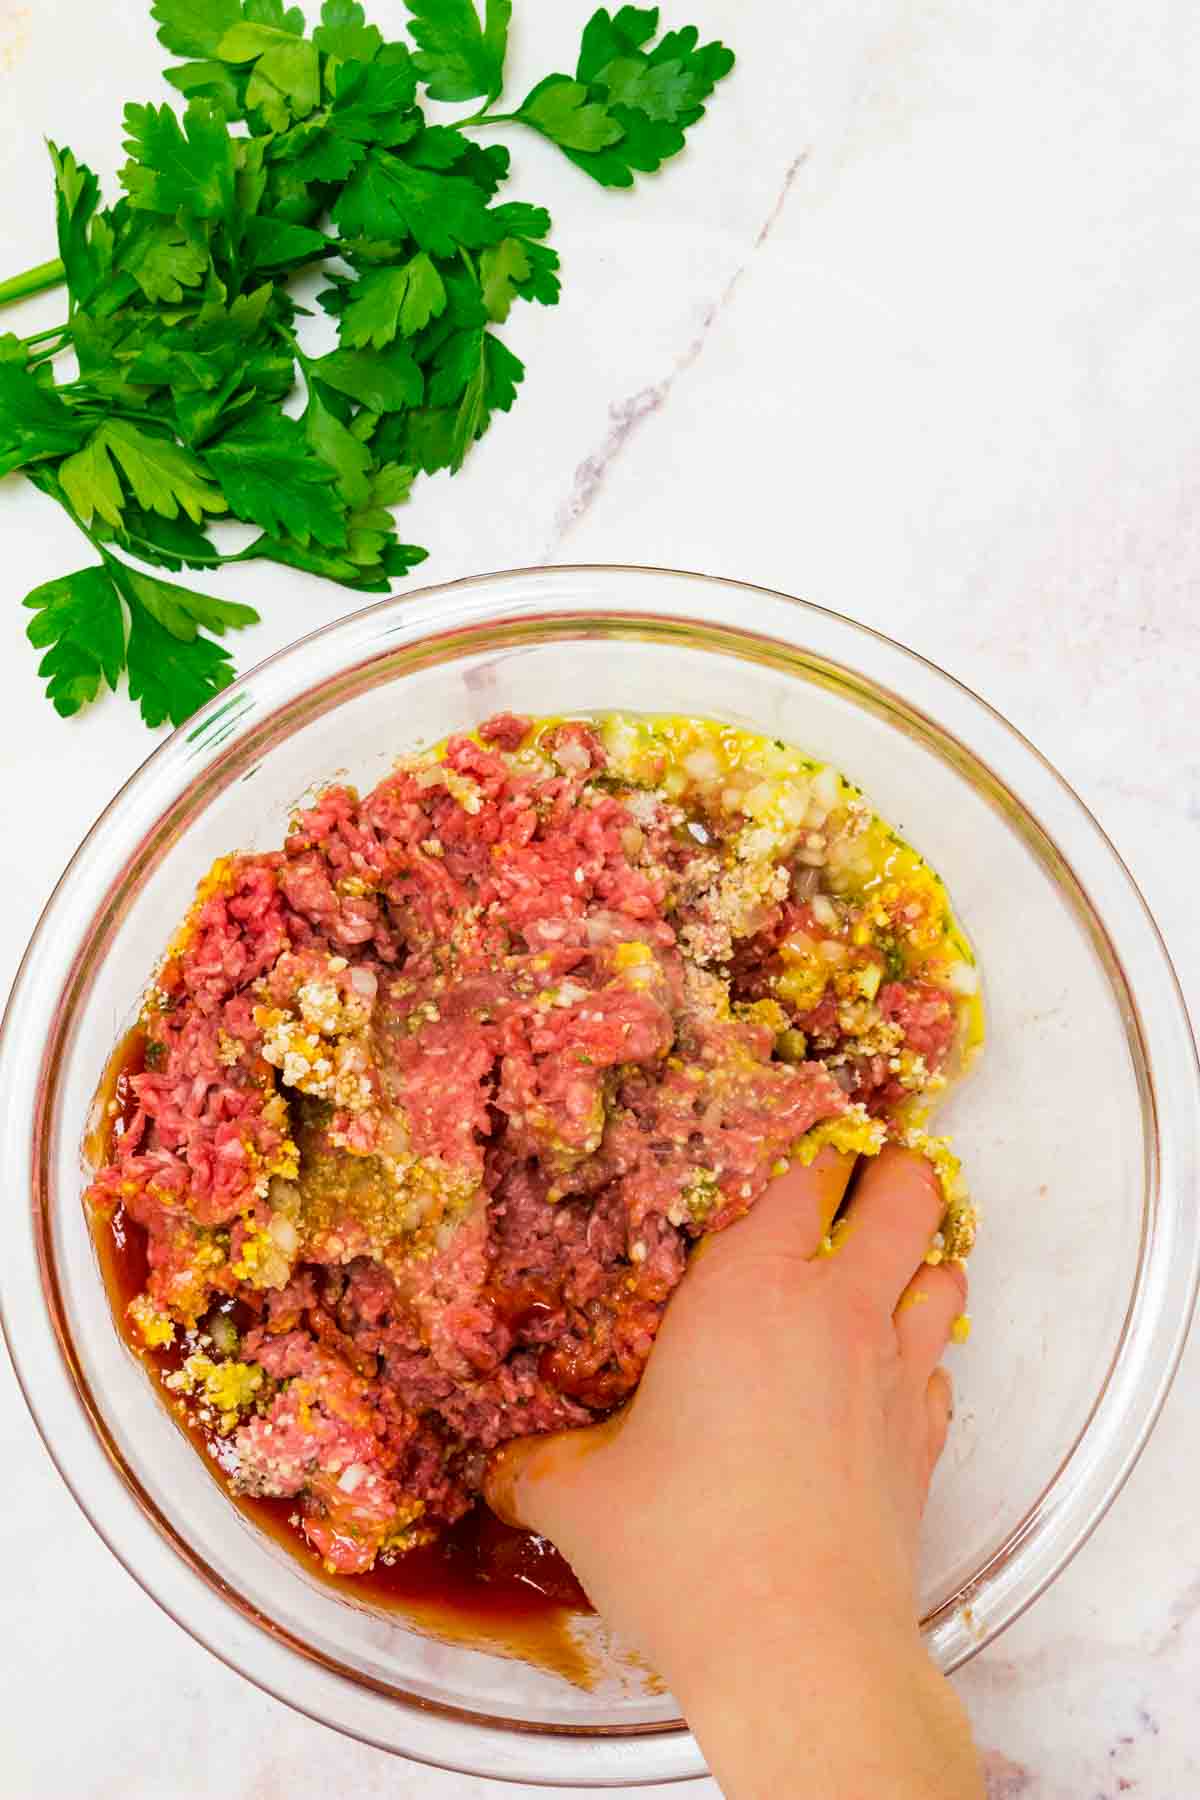 A hand mixing ground beef and meatloaf ingredients inside a glass bowl.